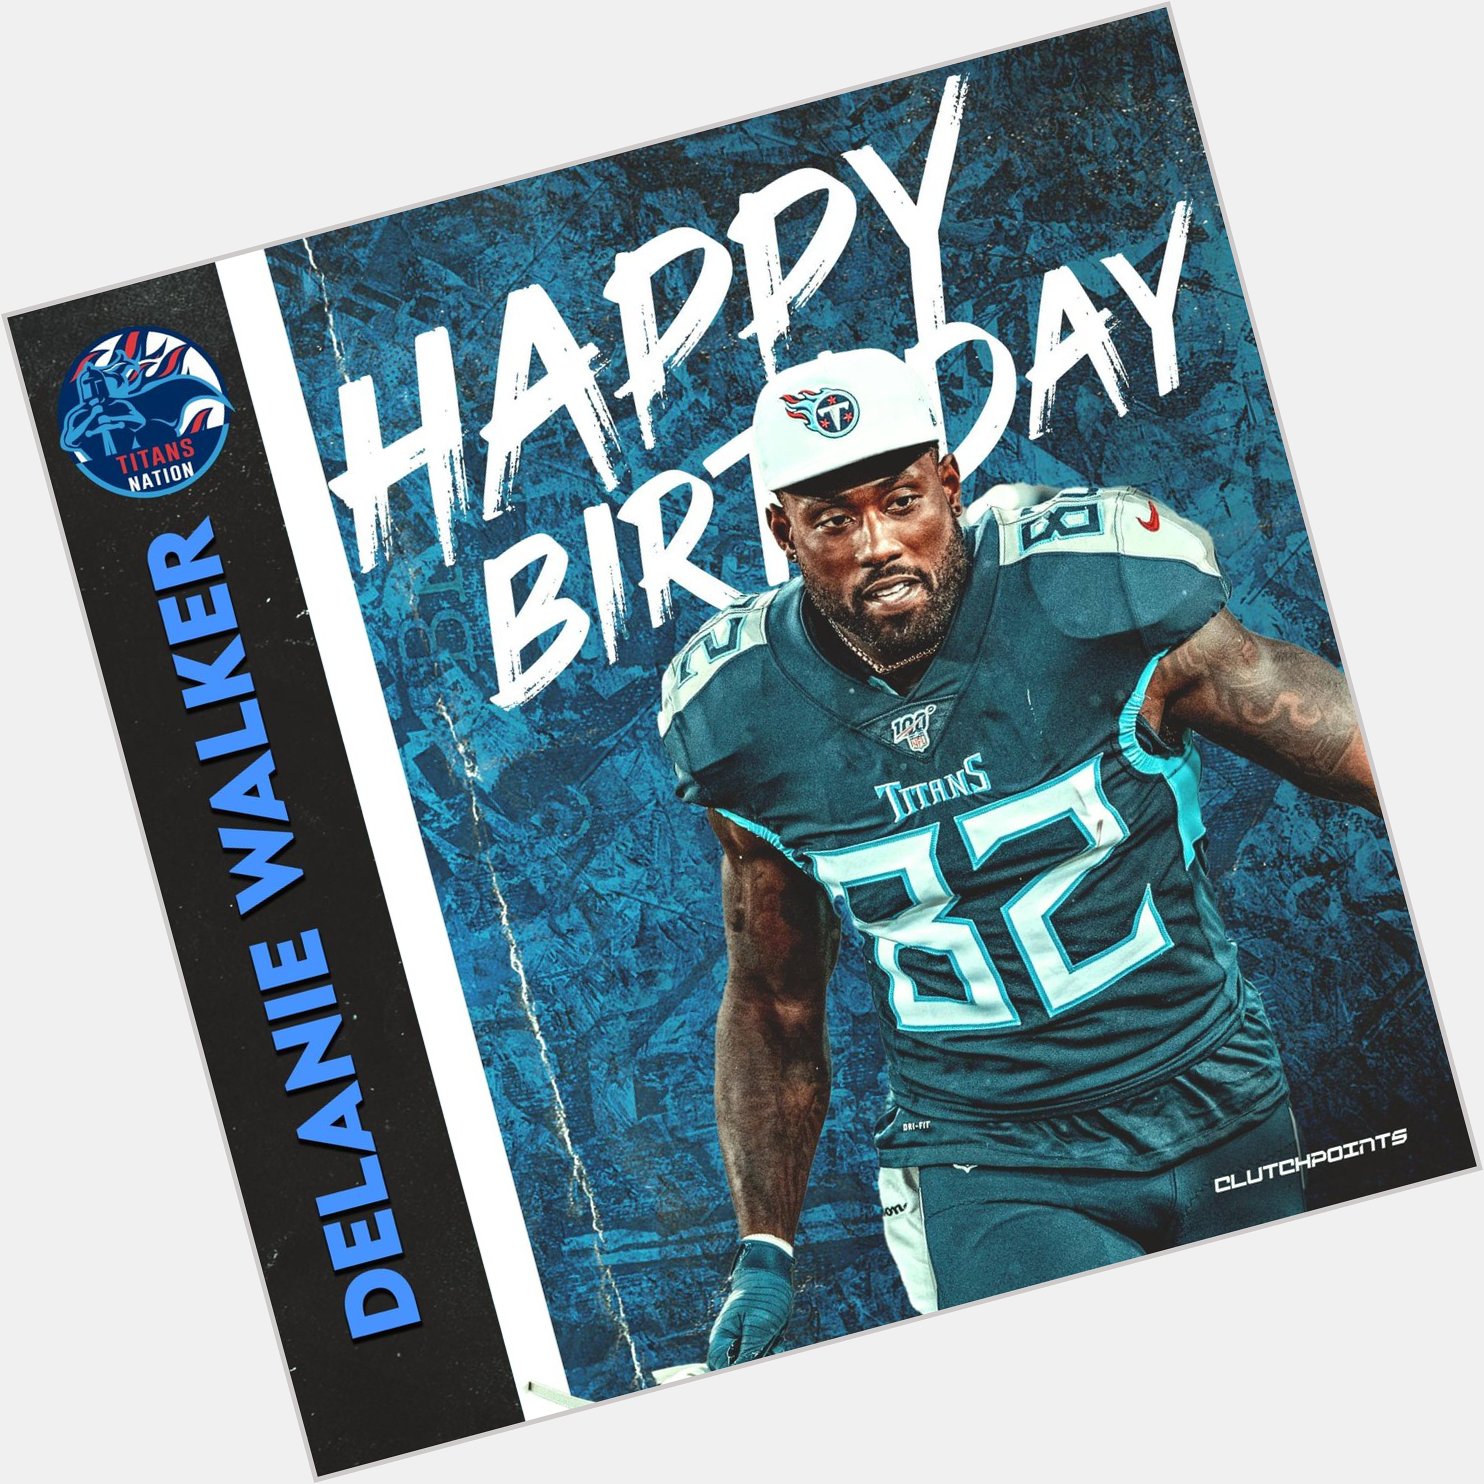 Join Titans Nation in greeting 3x Pro Bowler Delanie Walker a happy 37th birthday!  